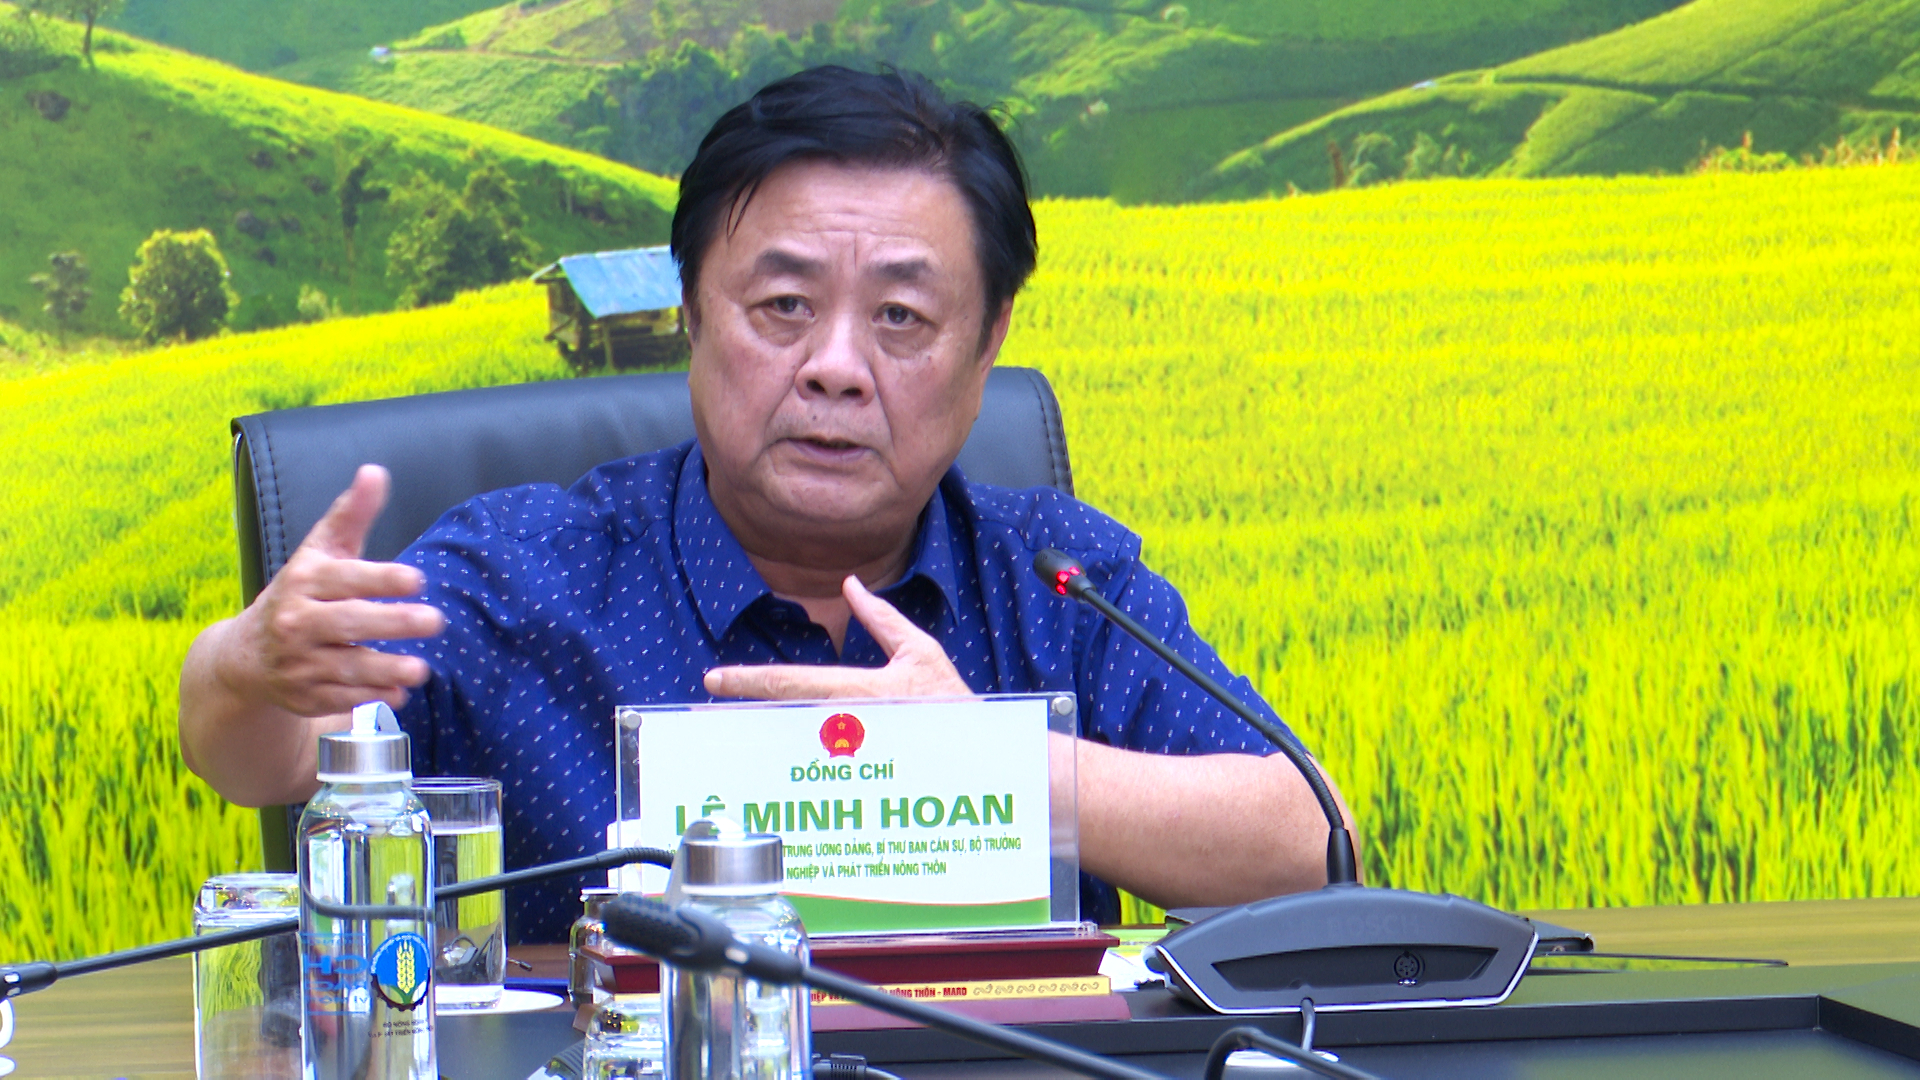 Minister of Agriculture and Rural Development Le Minh Hoan discussed with associations and industries the new EU regulation on deforestation prevention. Photo: Quang Linh.